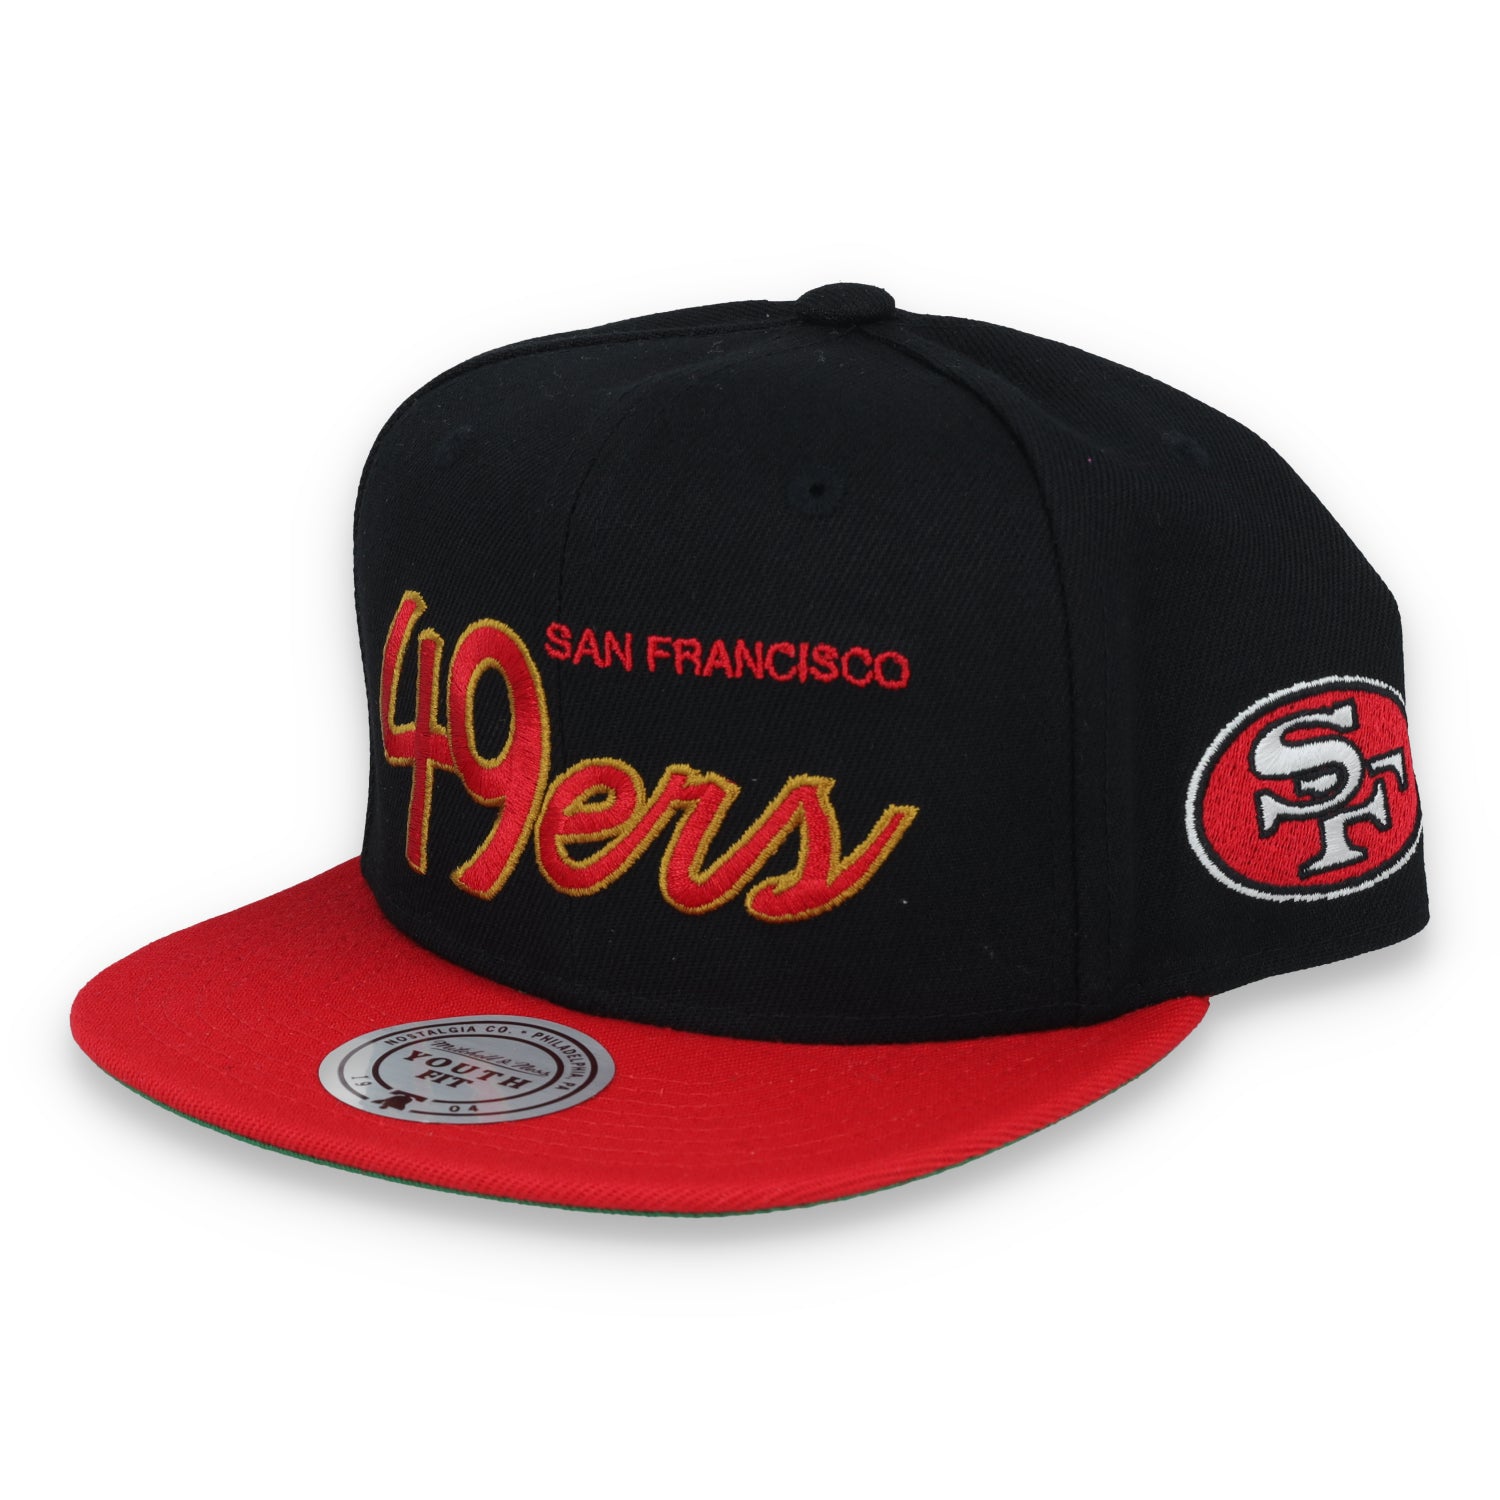 Mitchell & Ness Youth San Francisco 49ers Script Snapback Hat